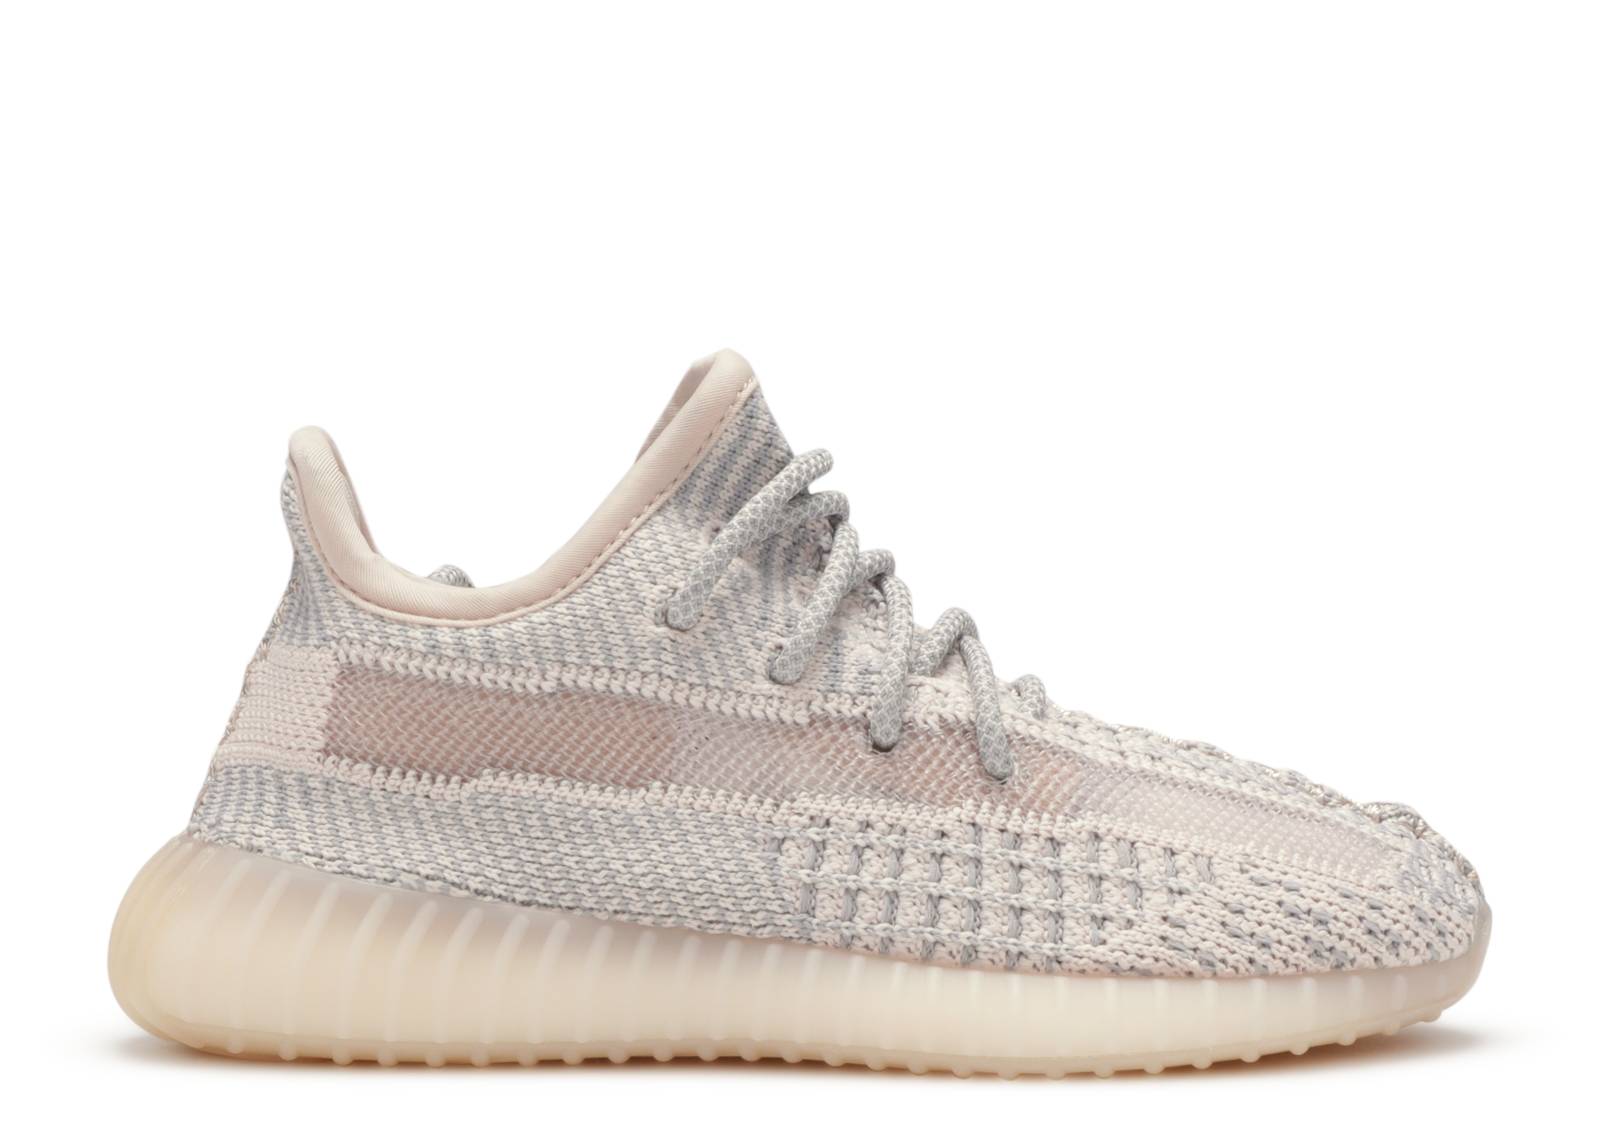 Yeezy Boost 350 V2 Infant 'Synth'